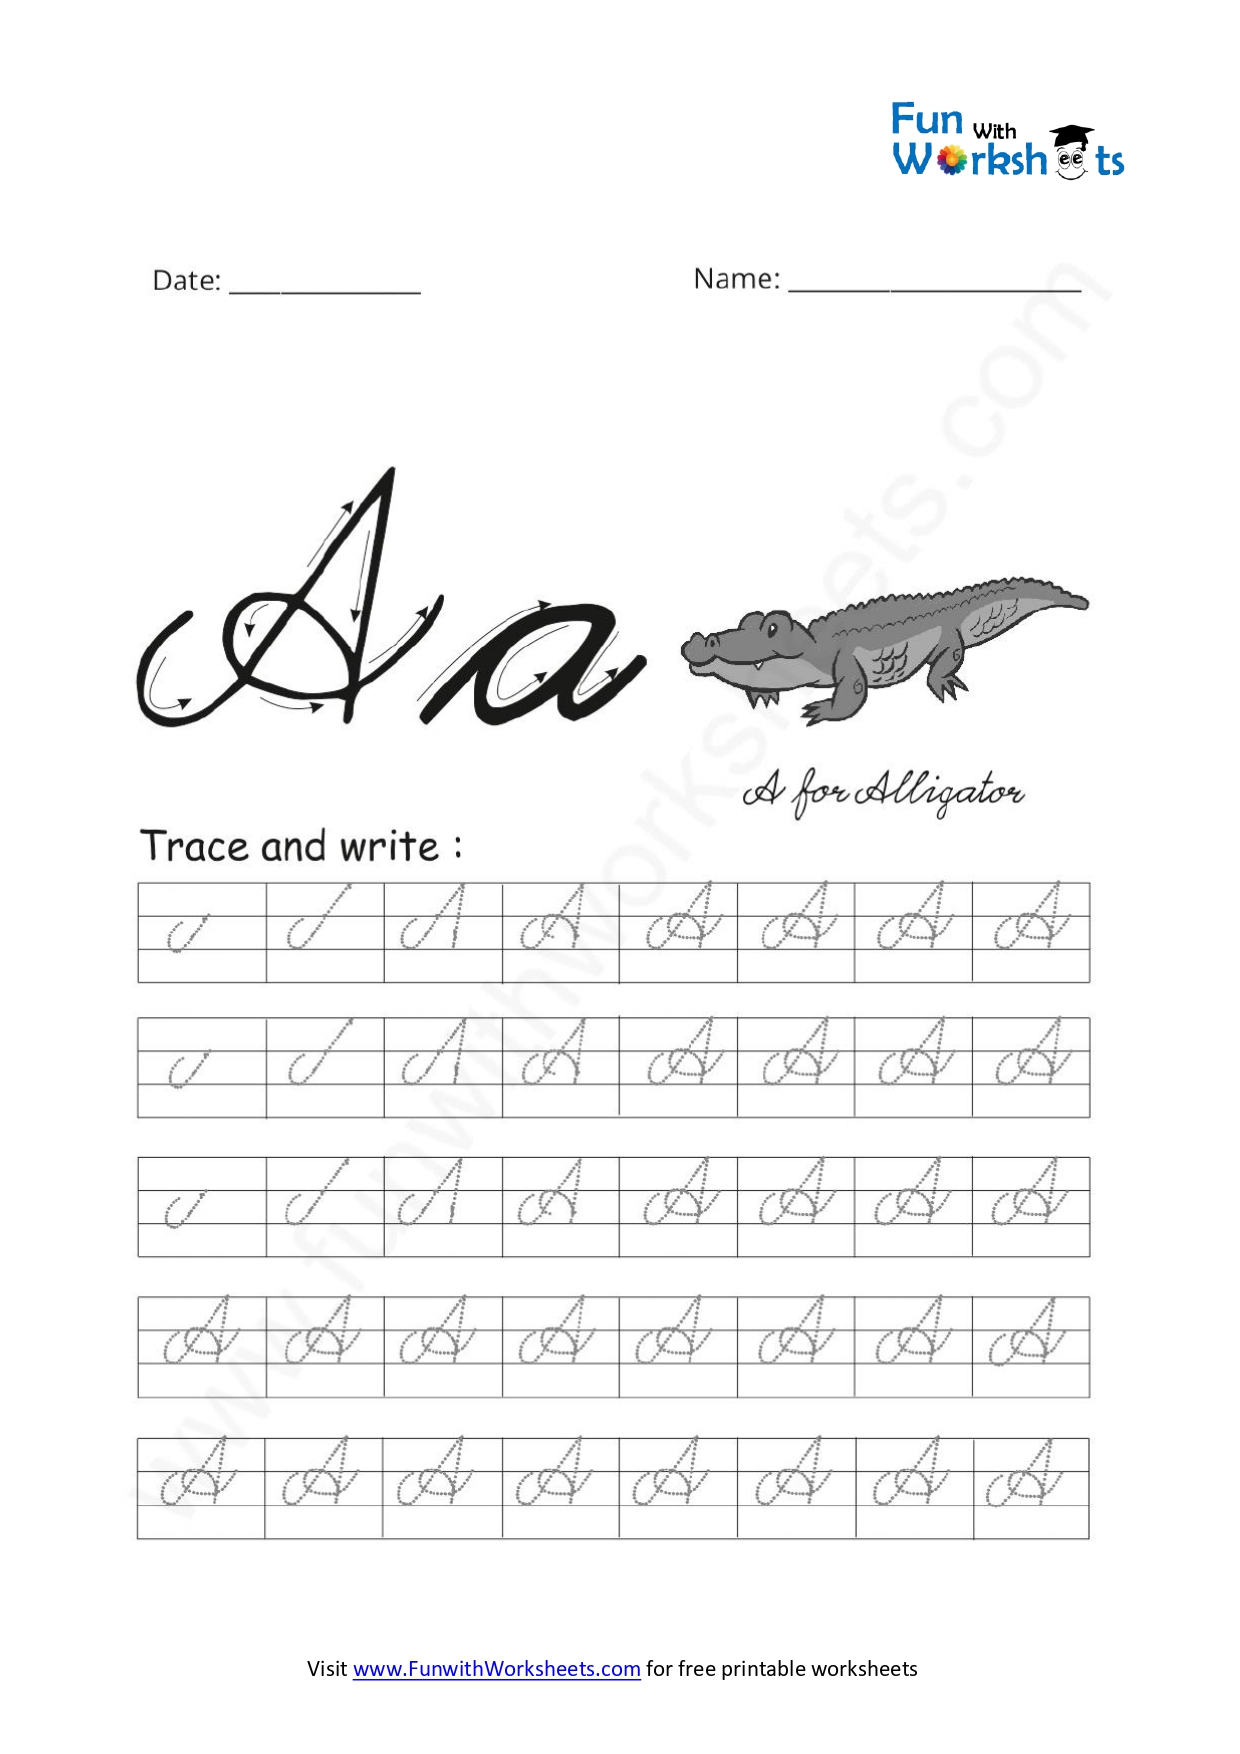 free-printable-worksheets-cursive-capital-letters-archives-fun-with